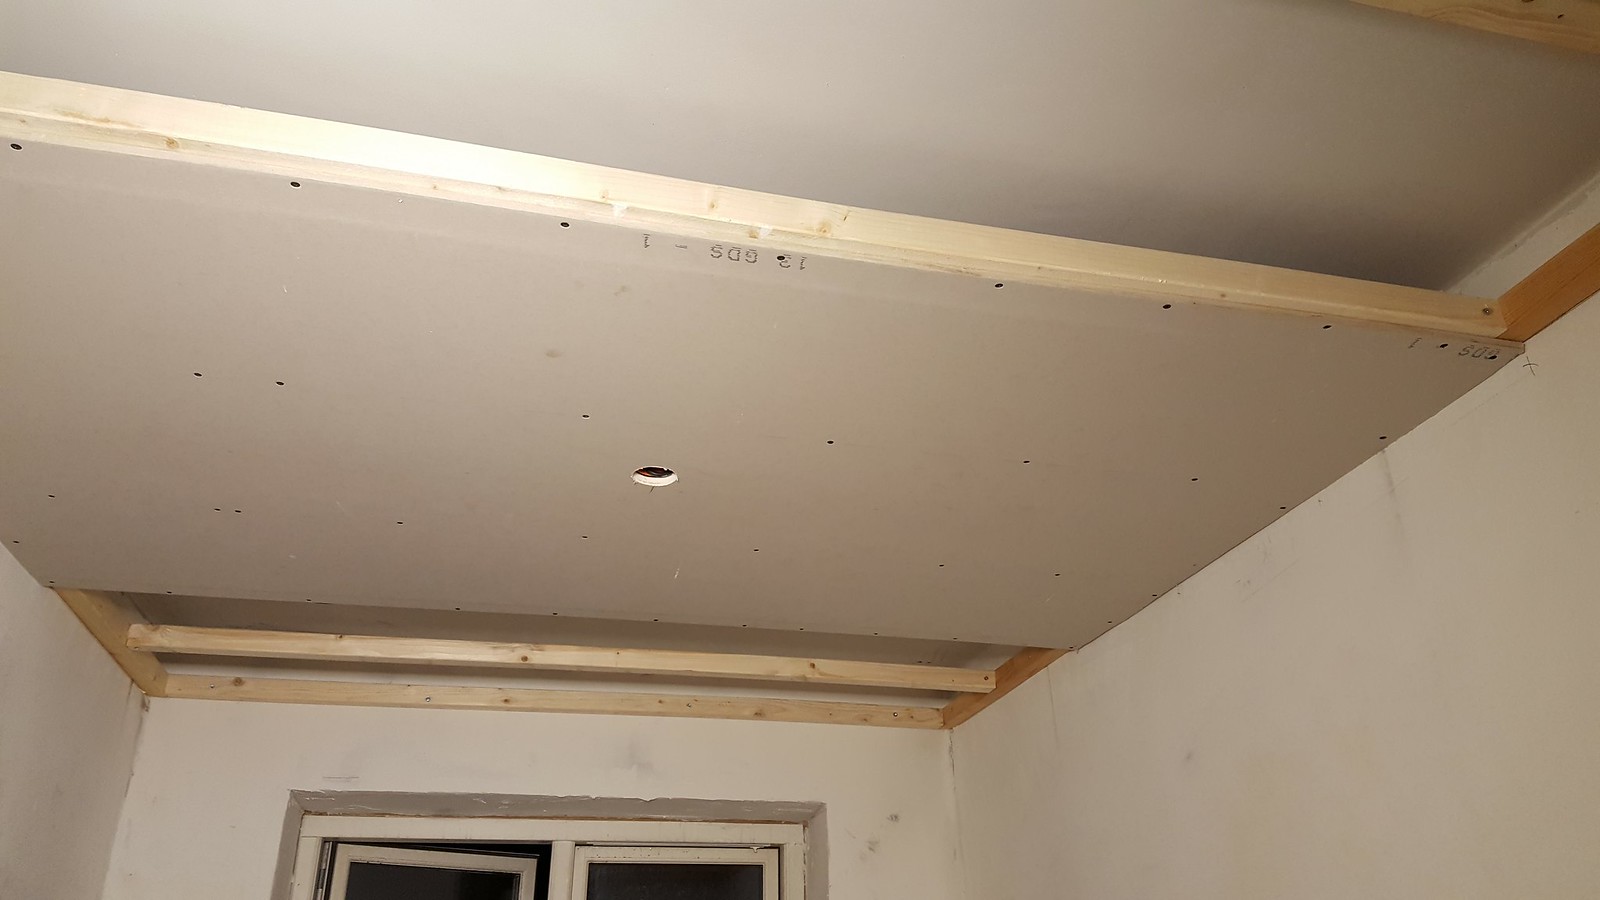 Guide: Lower Ceiling and Install LED Downlight